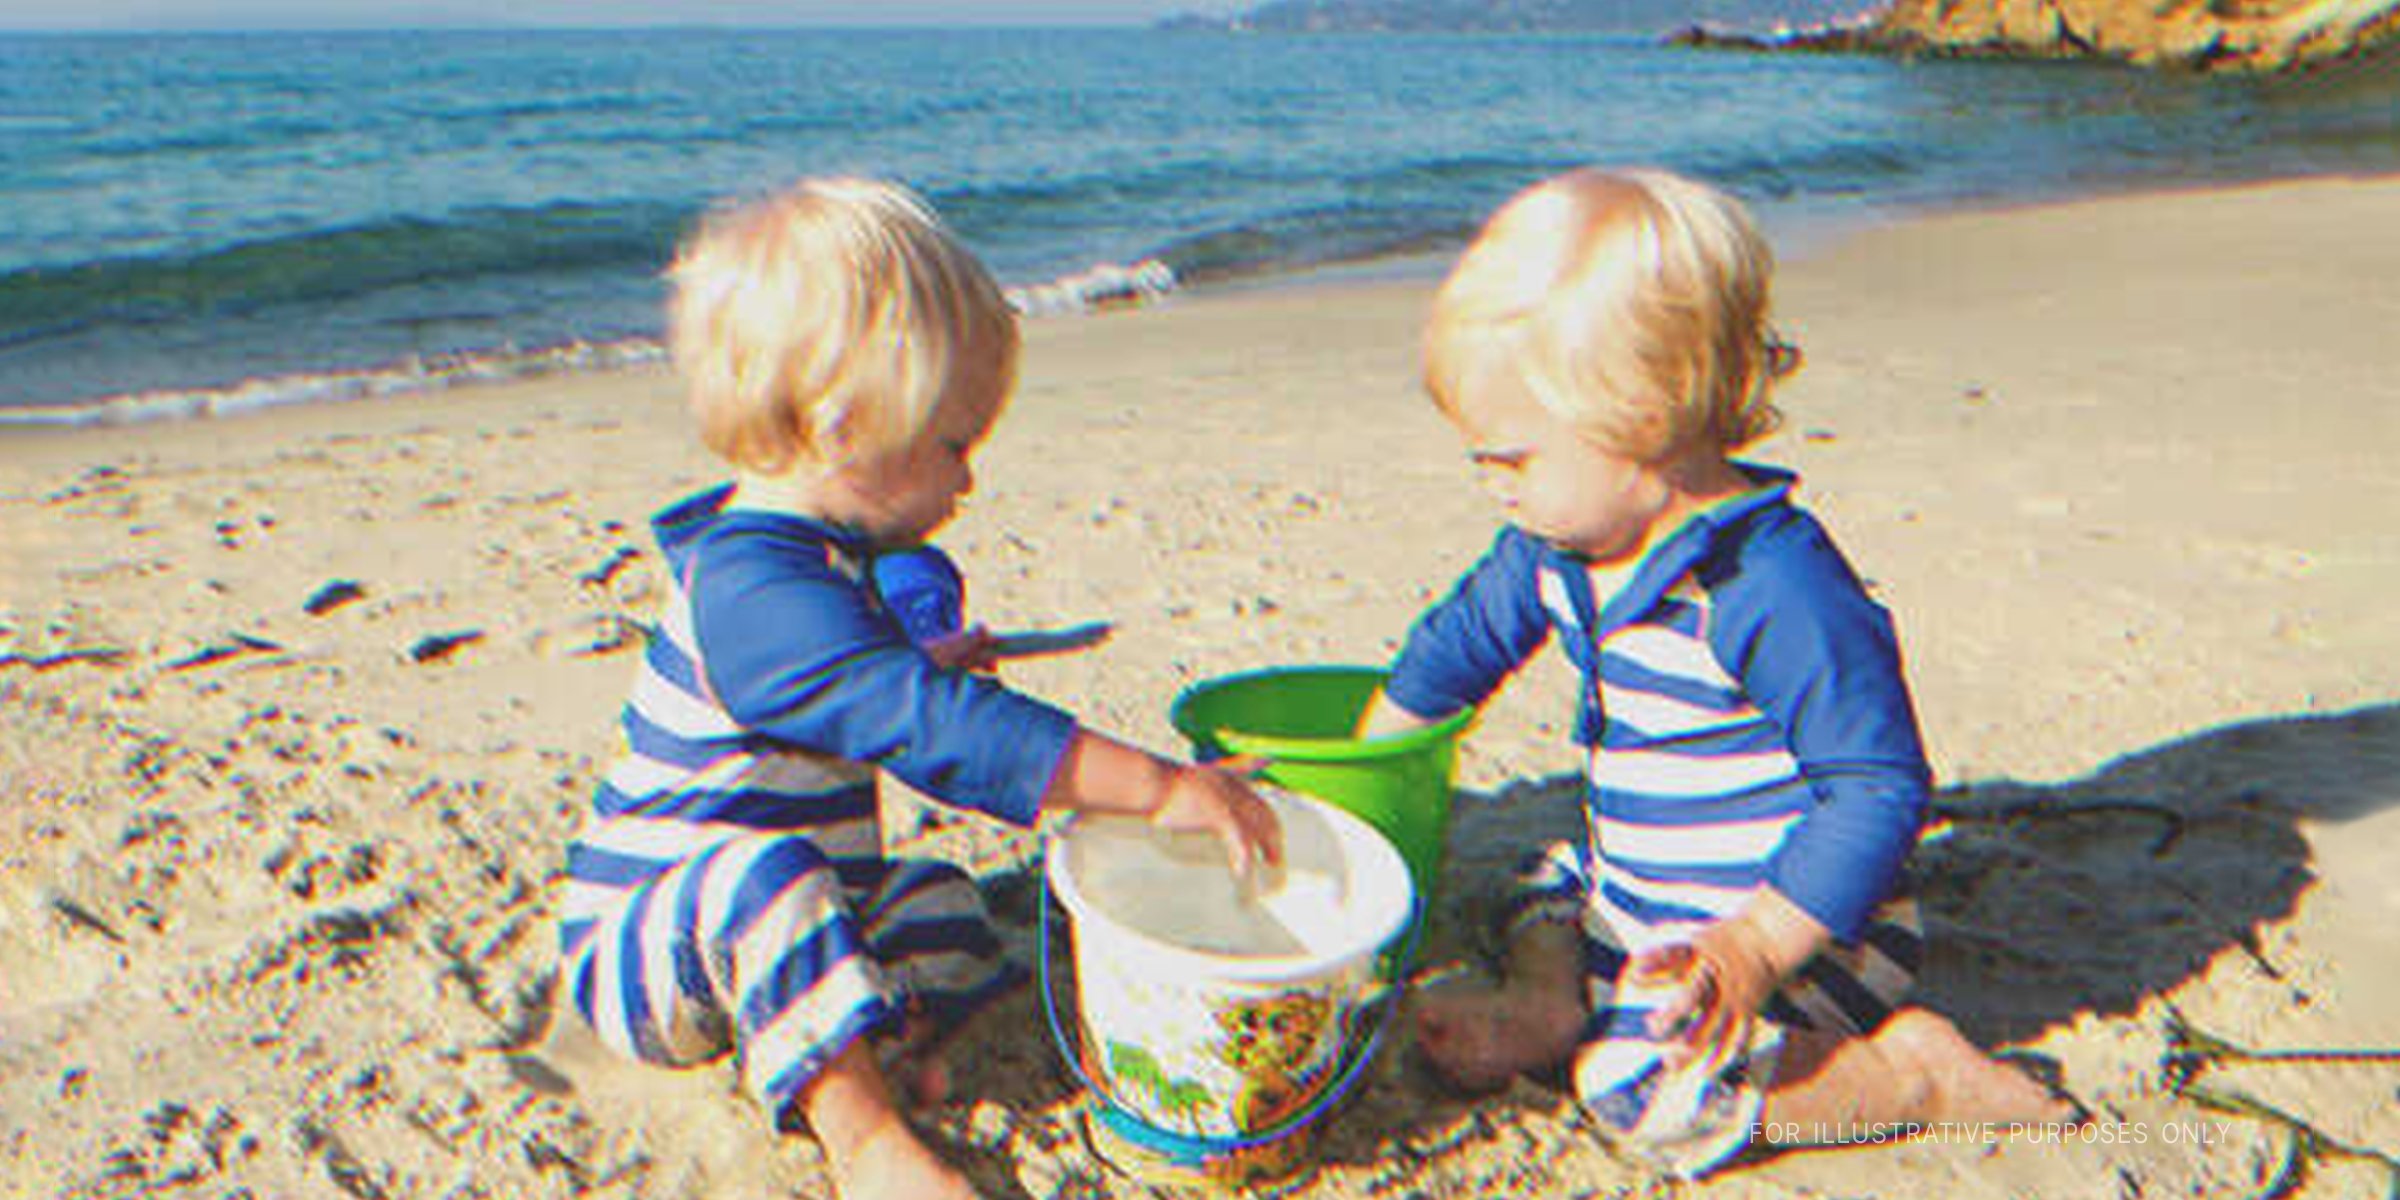 twins playing on the beach | Source: Getty Images